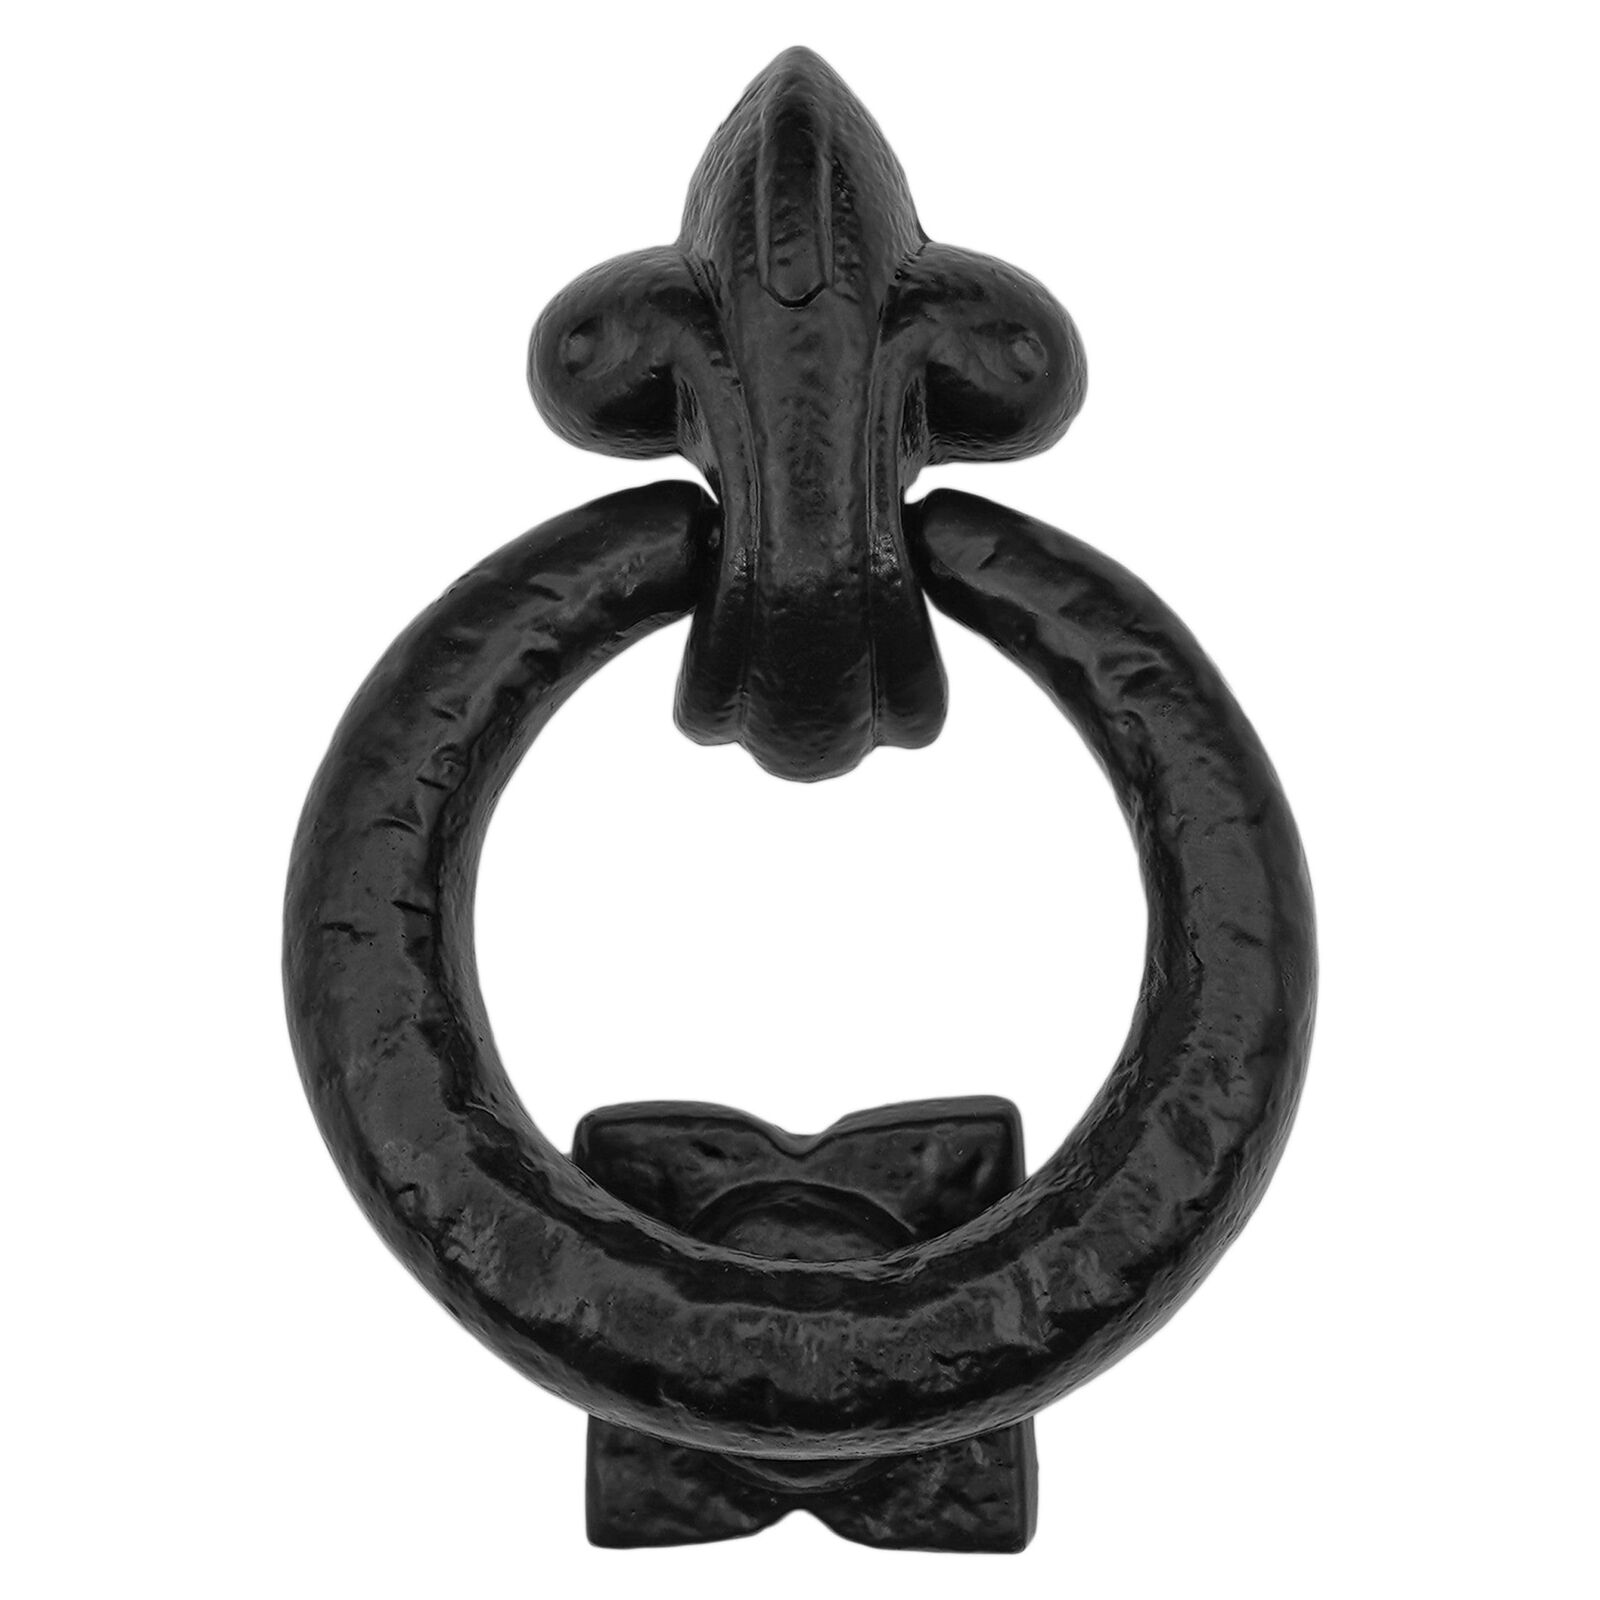 Front Door Knocker Cast Iron Artisan Made Hardware Home Décoration Accessory